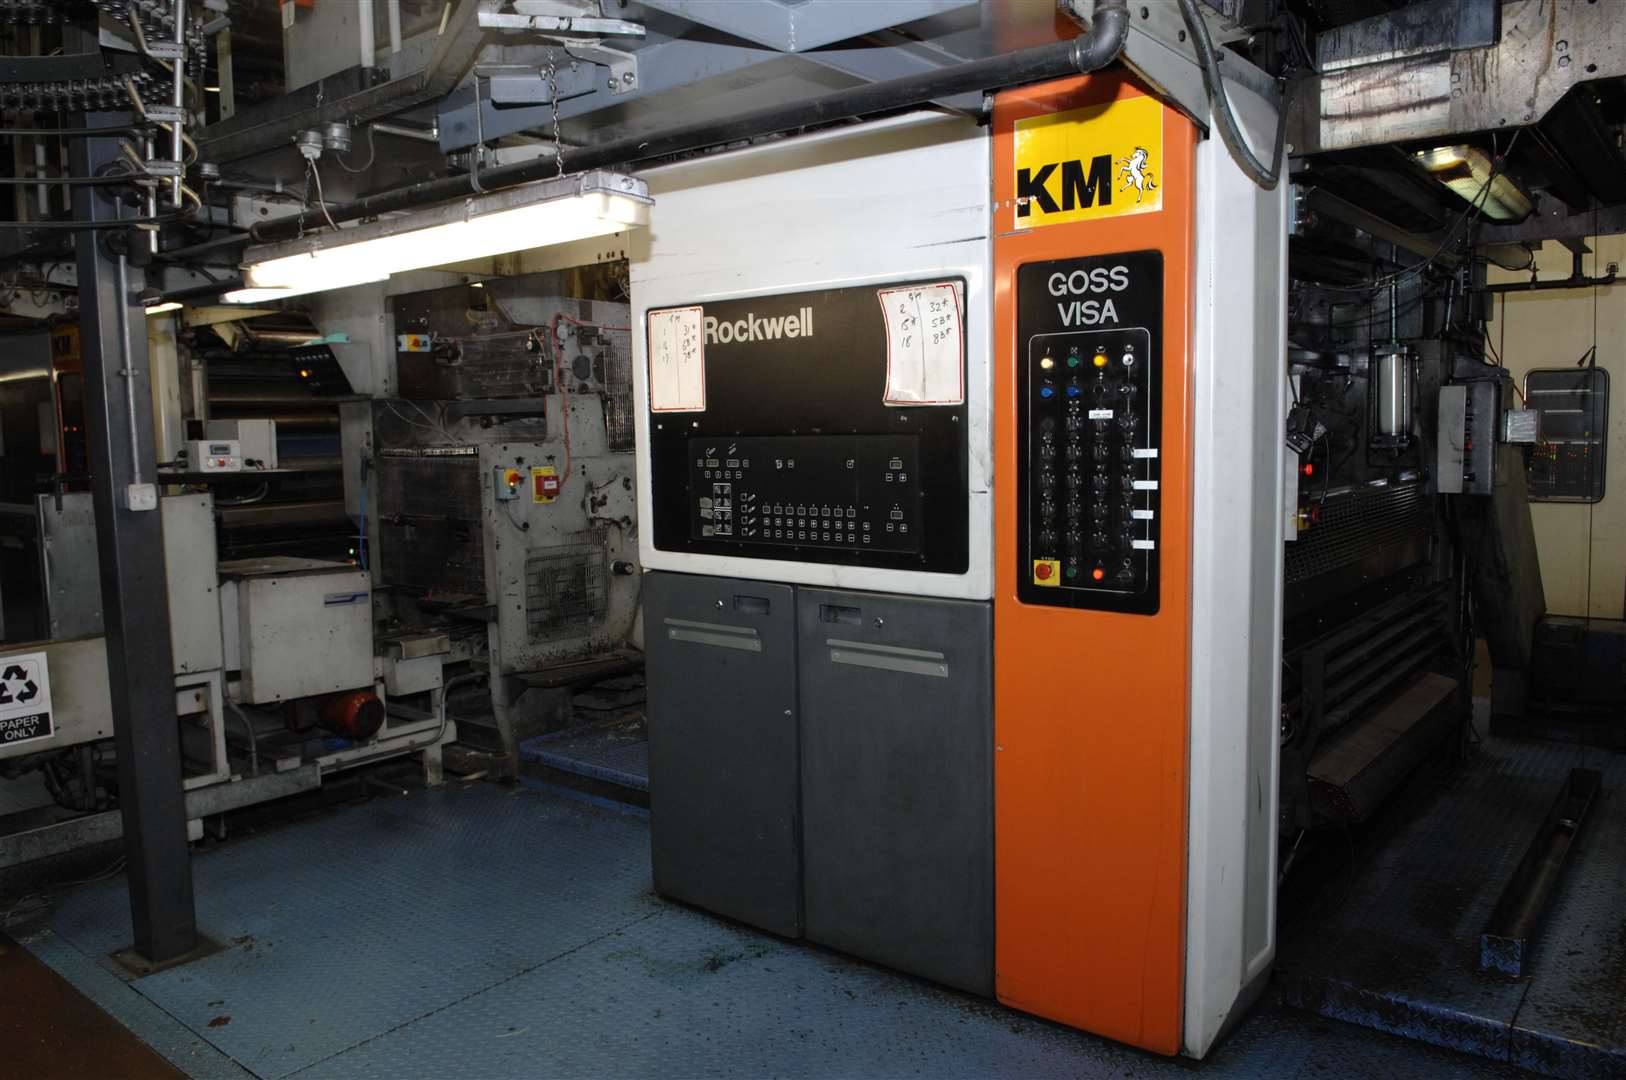 The Messenger was initially printed at the KM group's head office in Larkfield